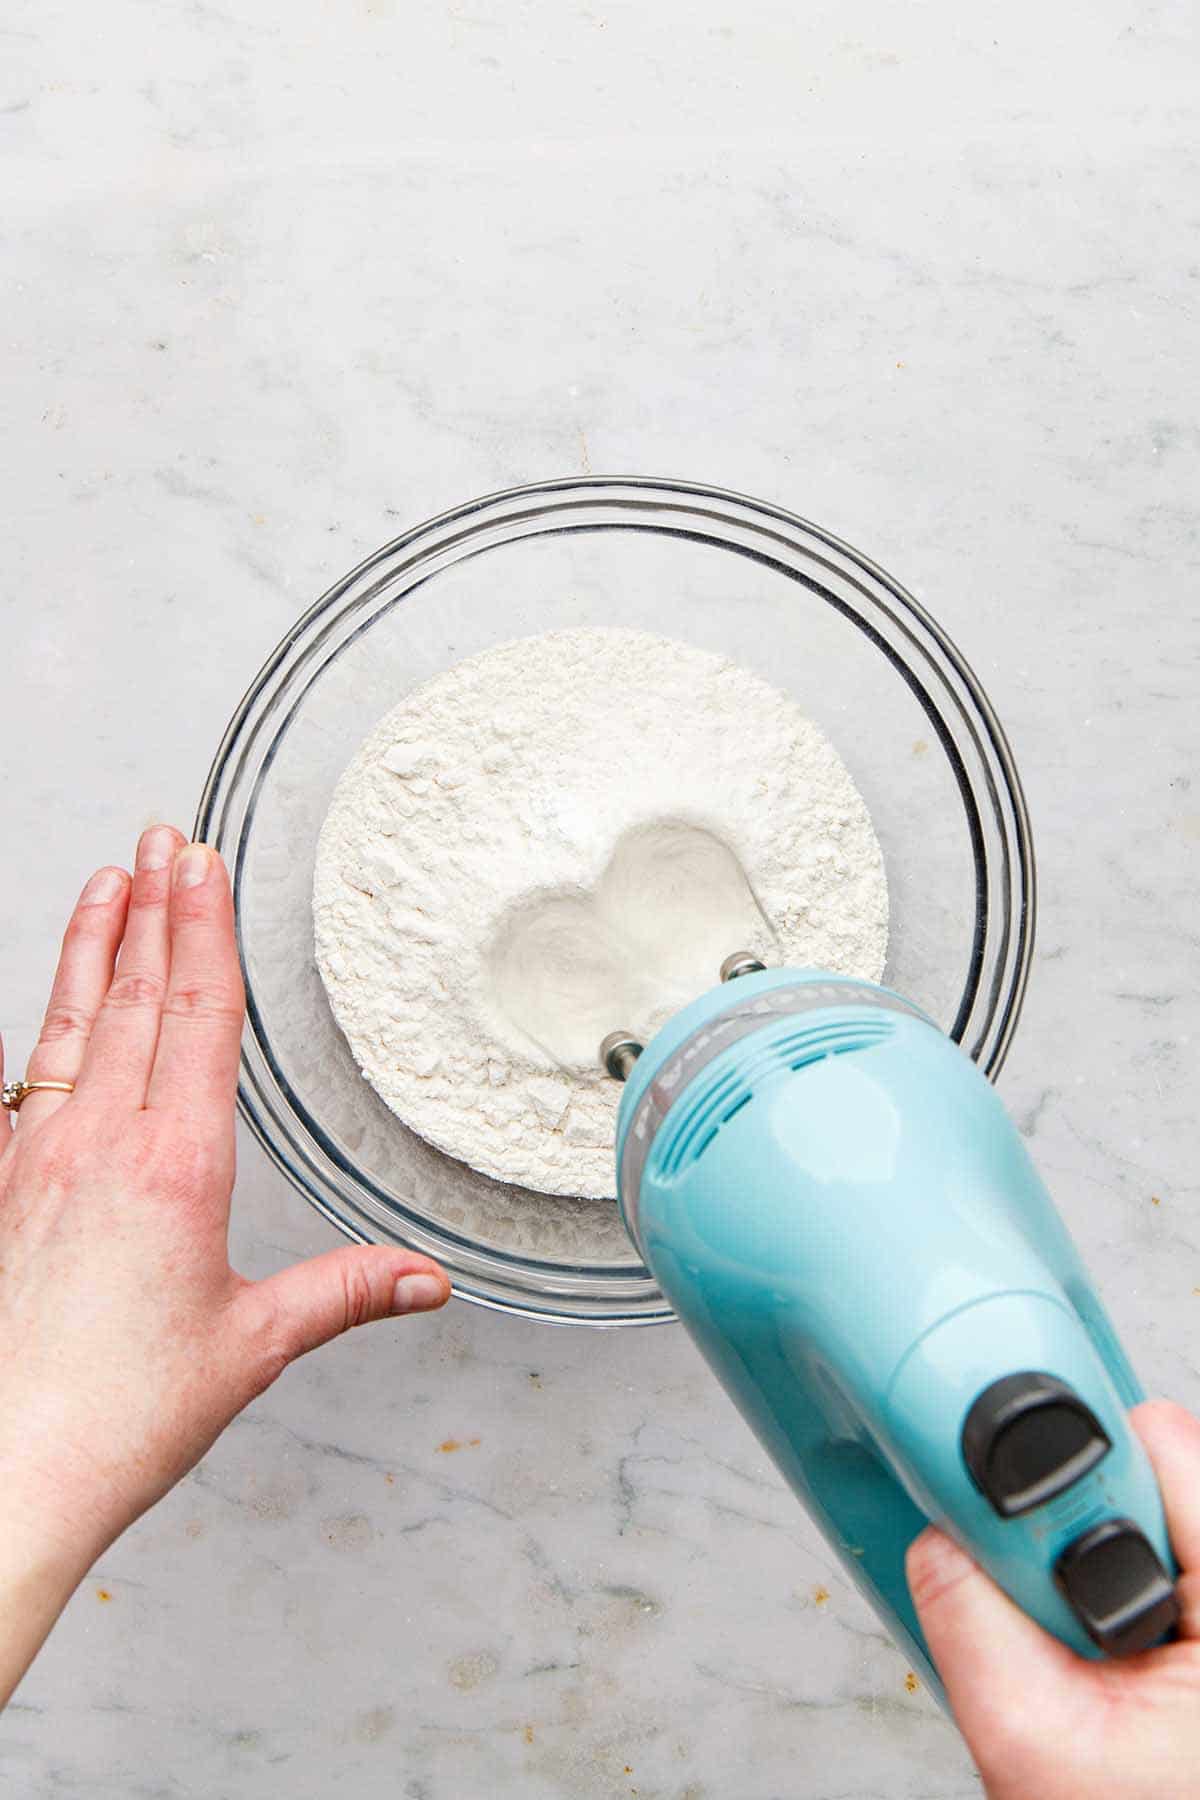 A hand using a hand mixer to mix dry cookie ingredients together in a glass bowl.